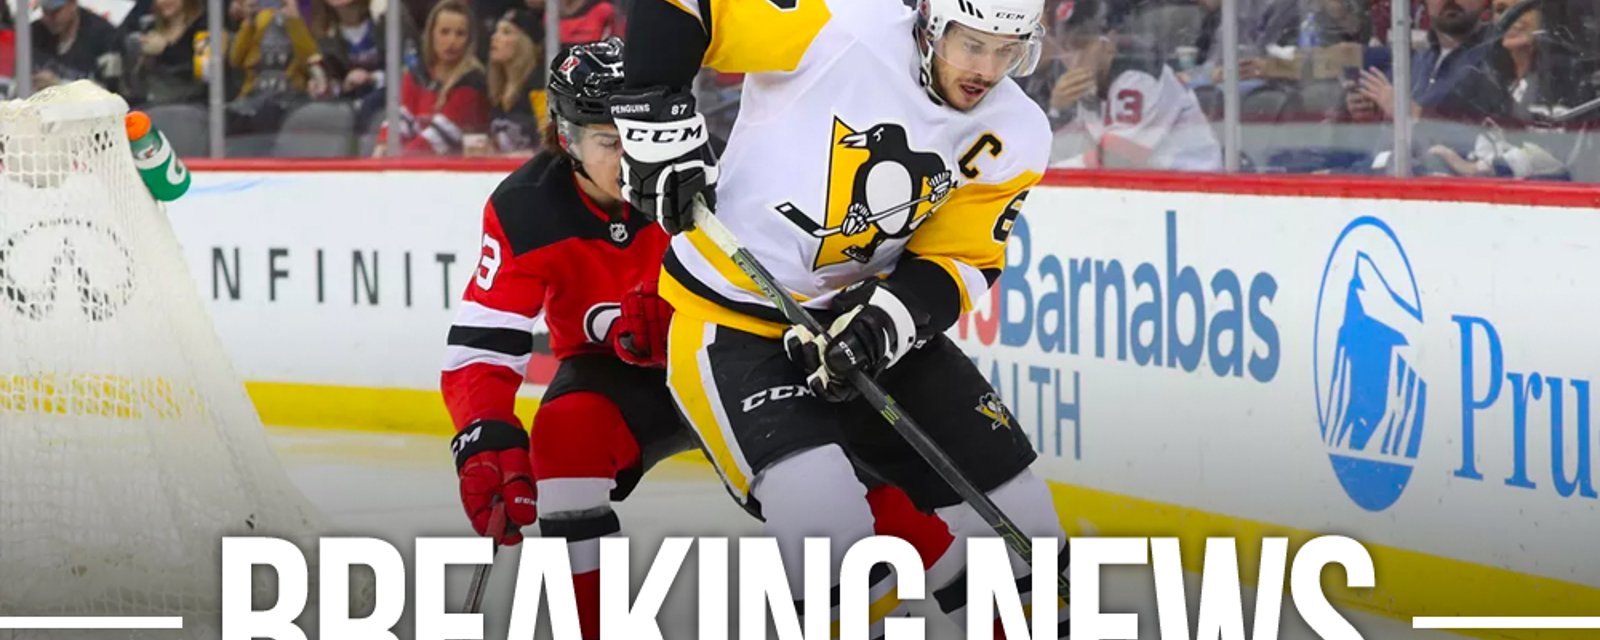 Report: Penguins game(s) to be postponed